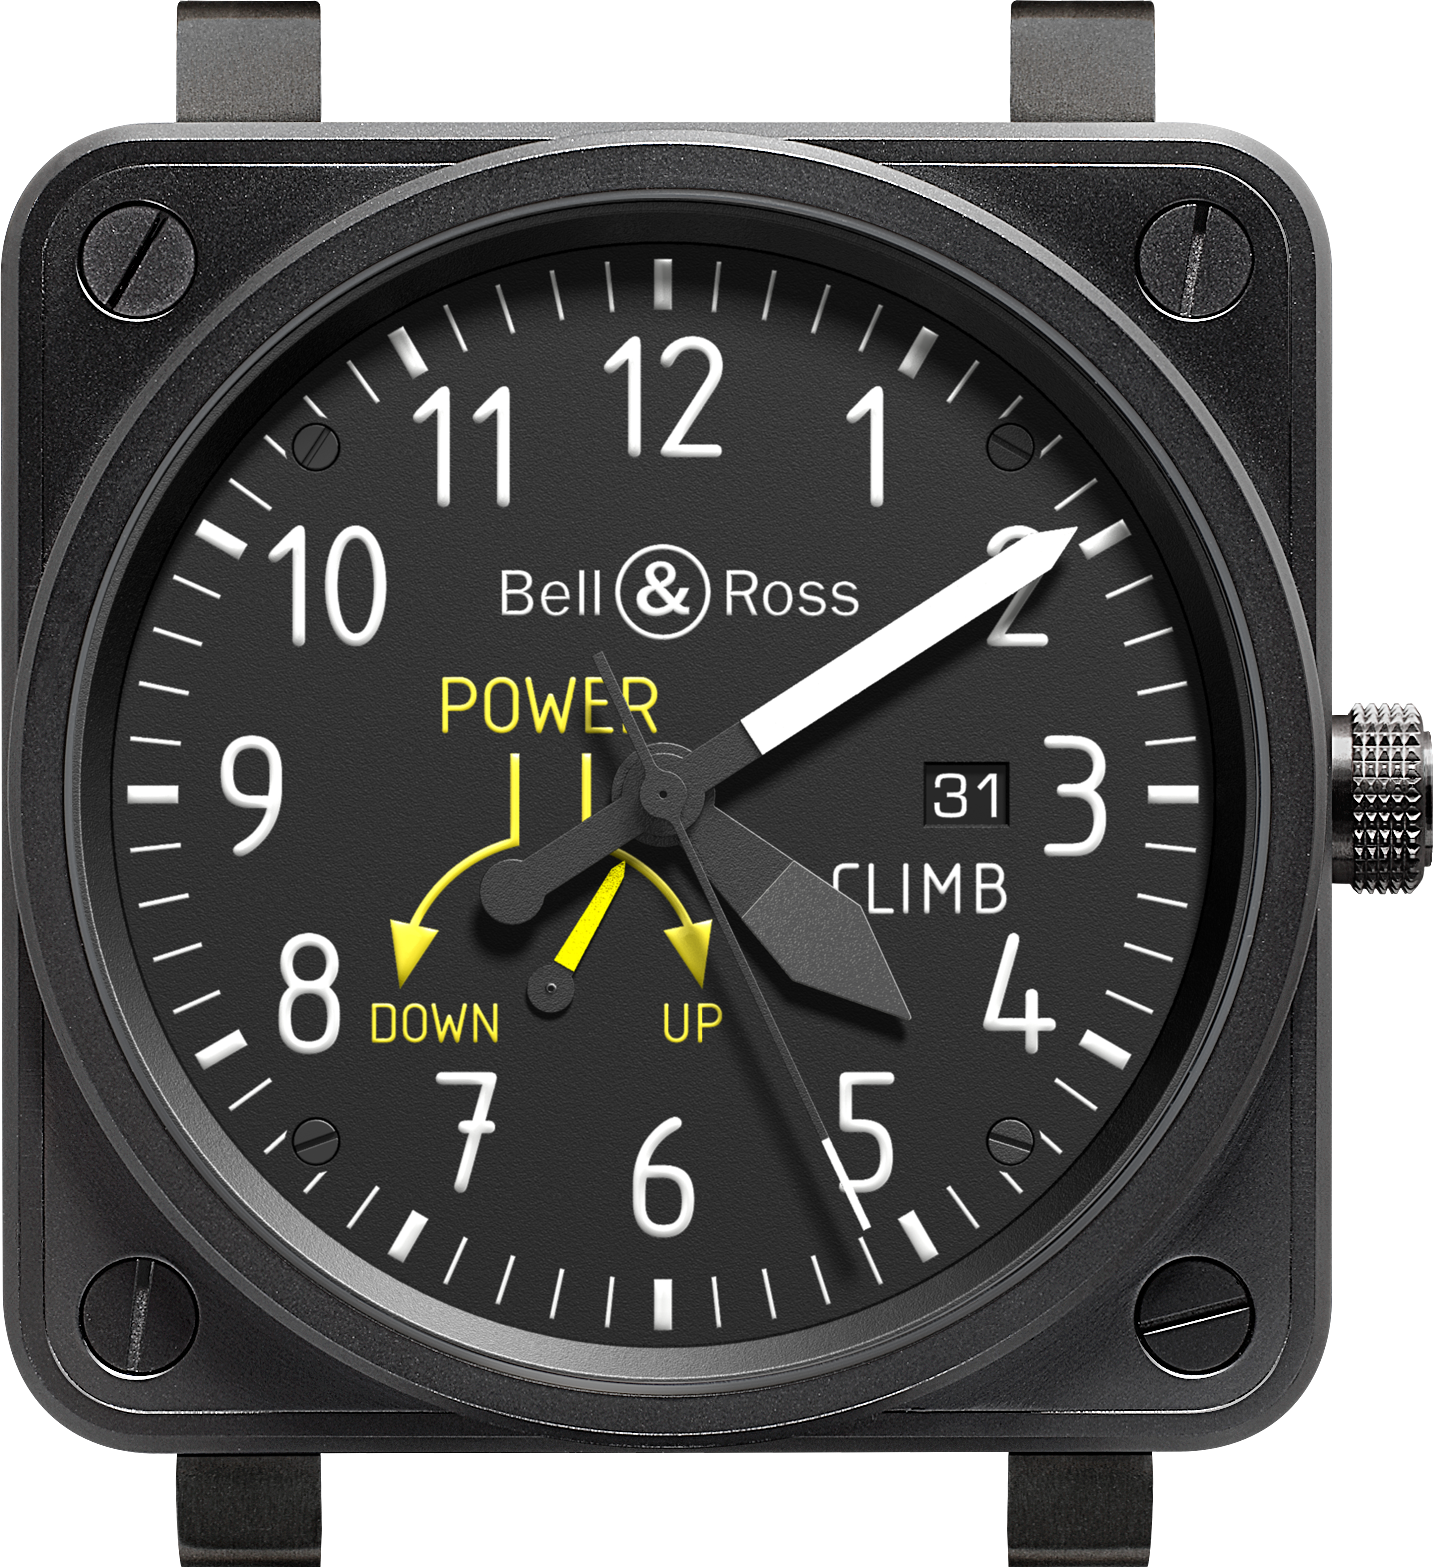 From Dissertation to Reality: The Founding of Bell & Ross